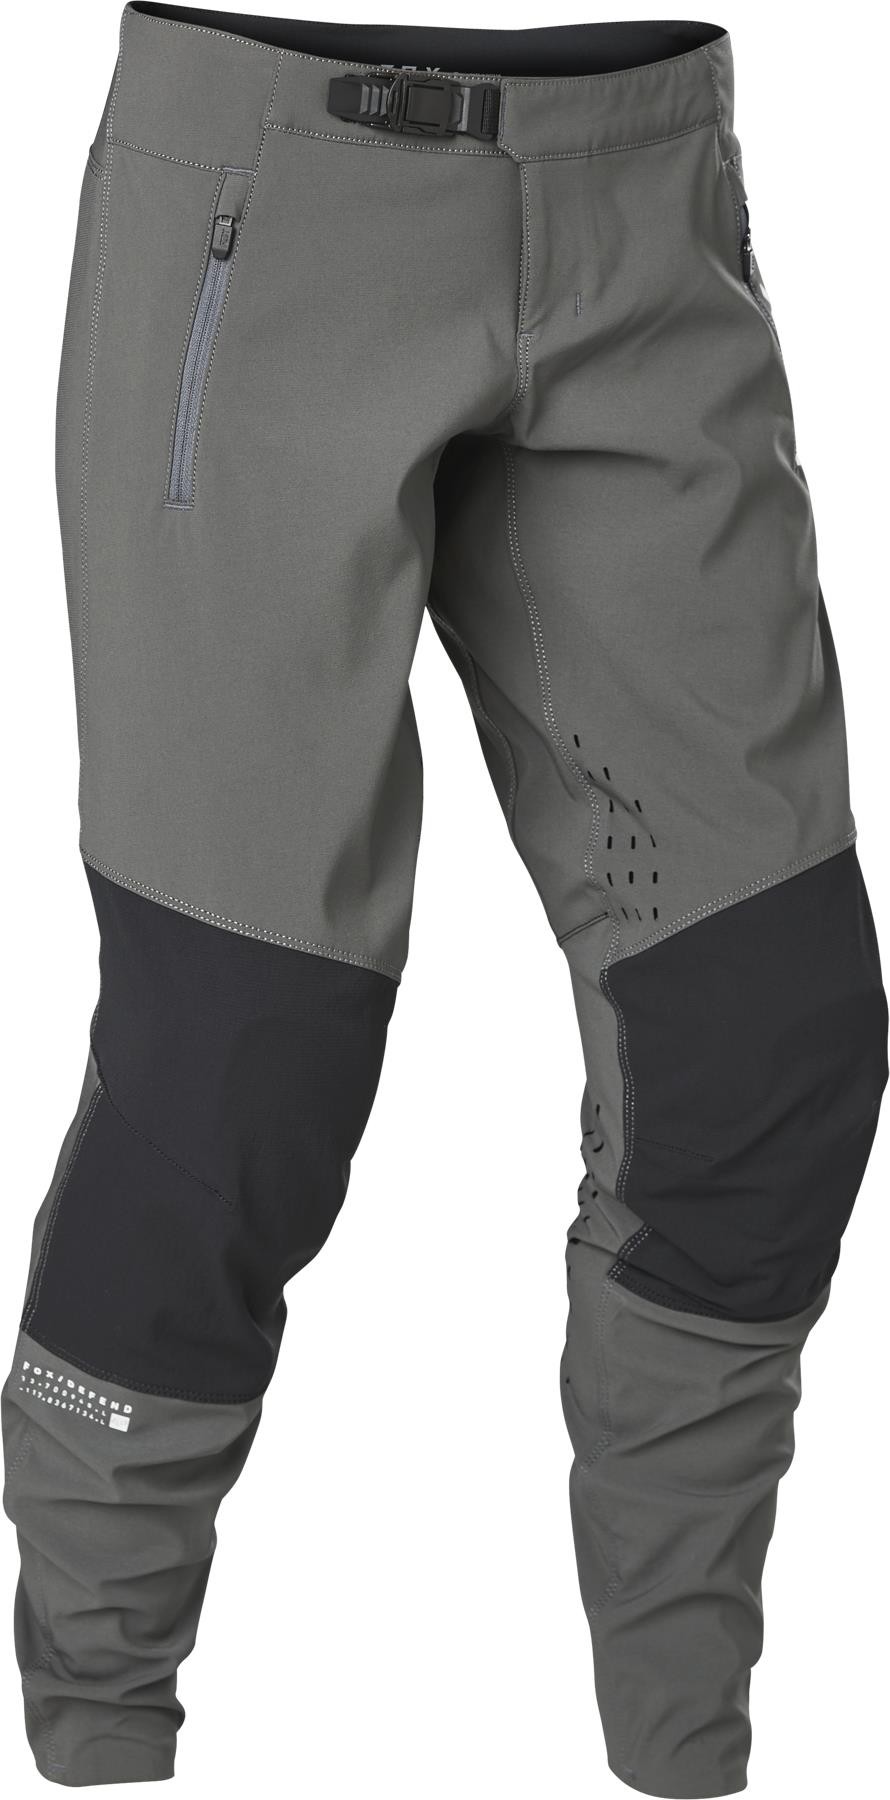 Defend Womens MTB Cycling Trousers image 0